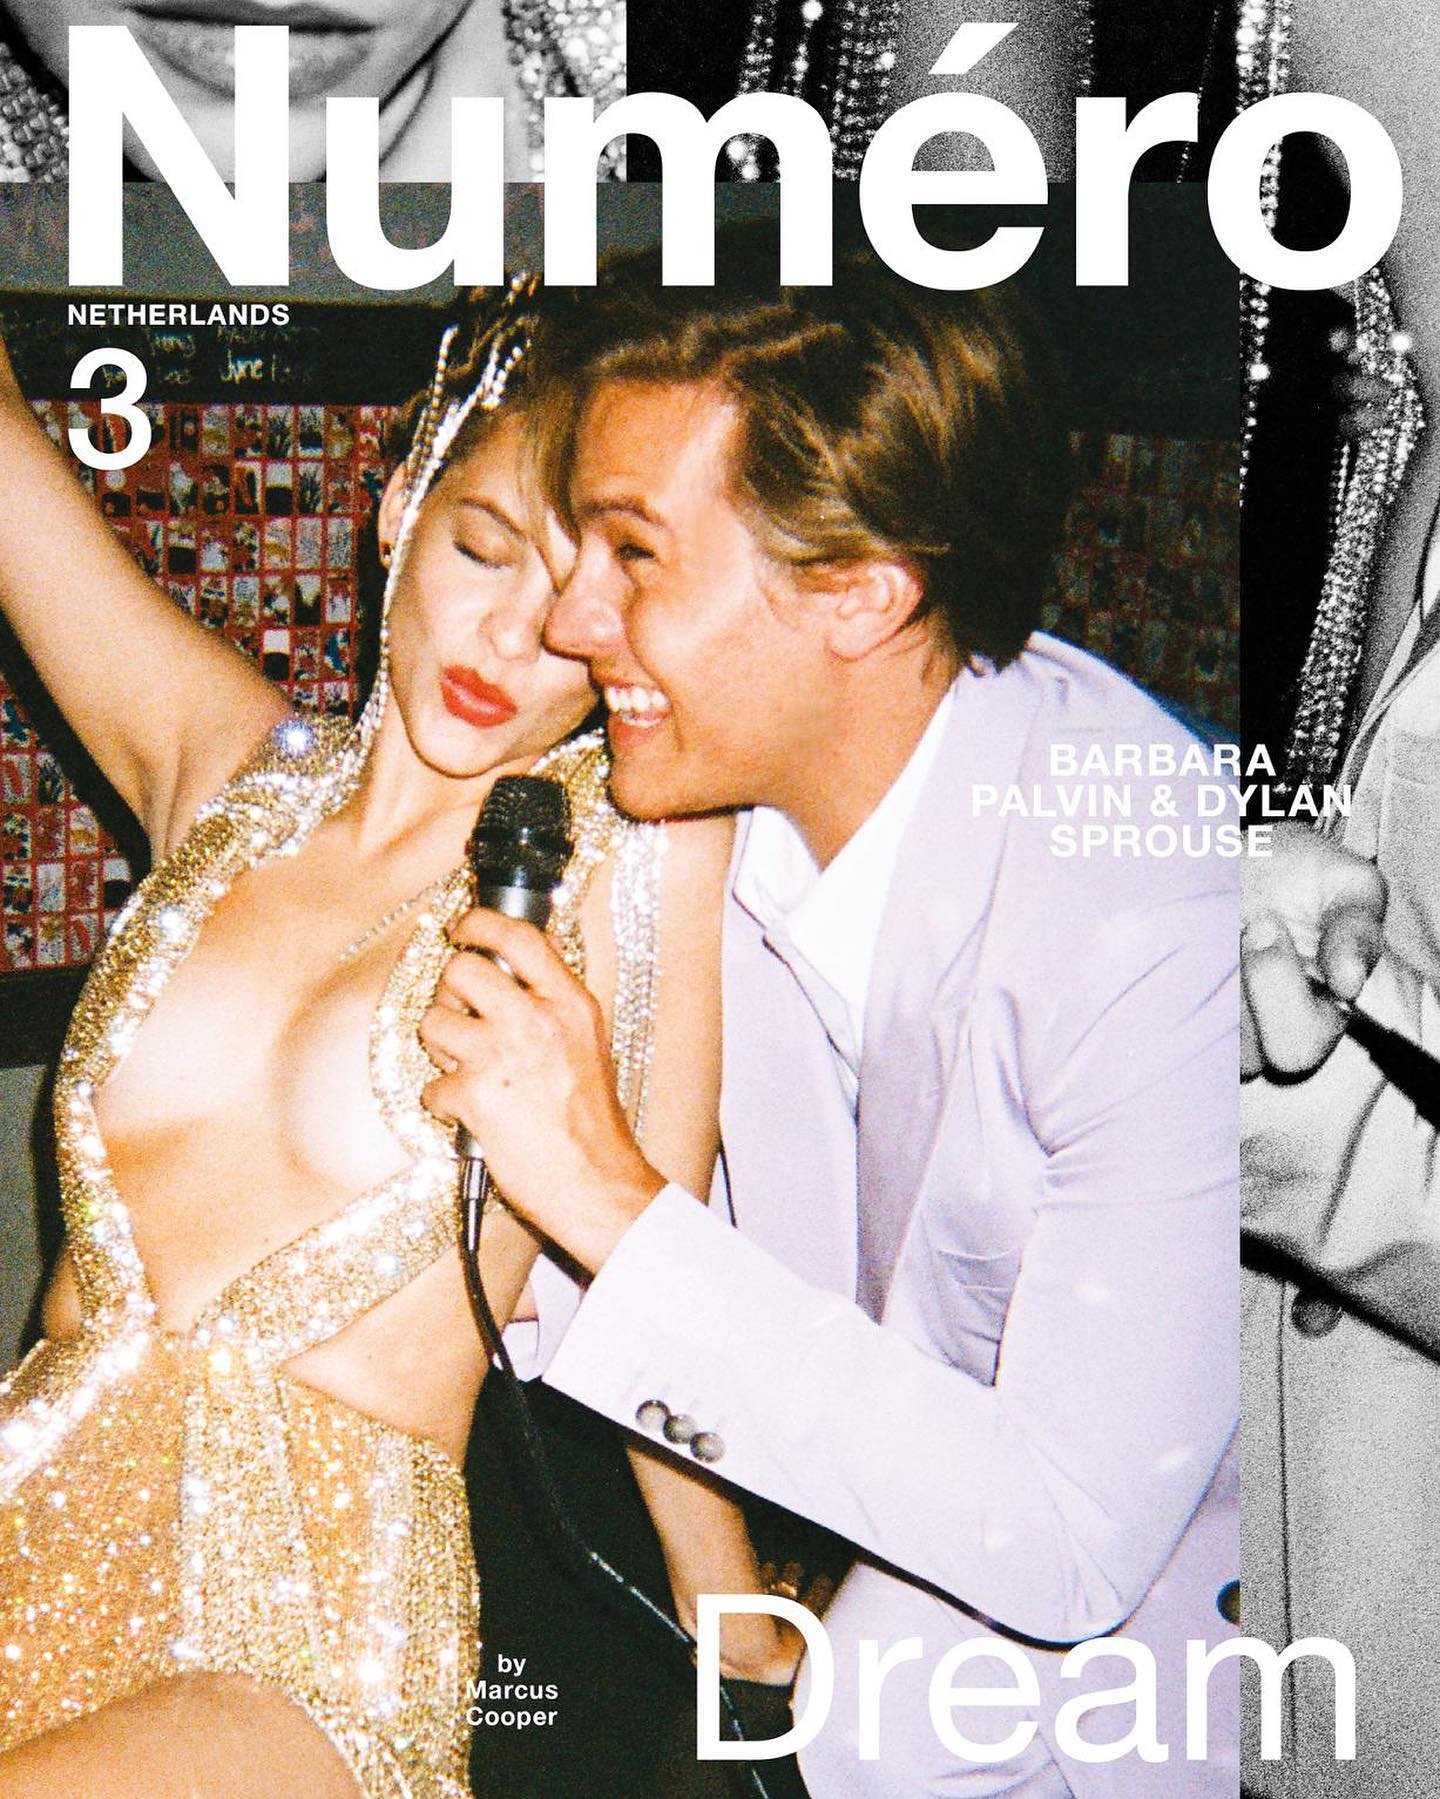 Barbara Palvin y Dylan Sprouse Hit the Cover! - Photo 17